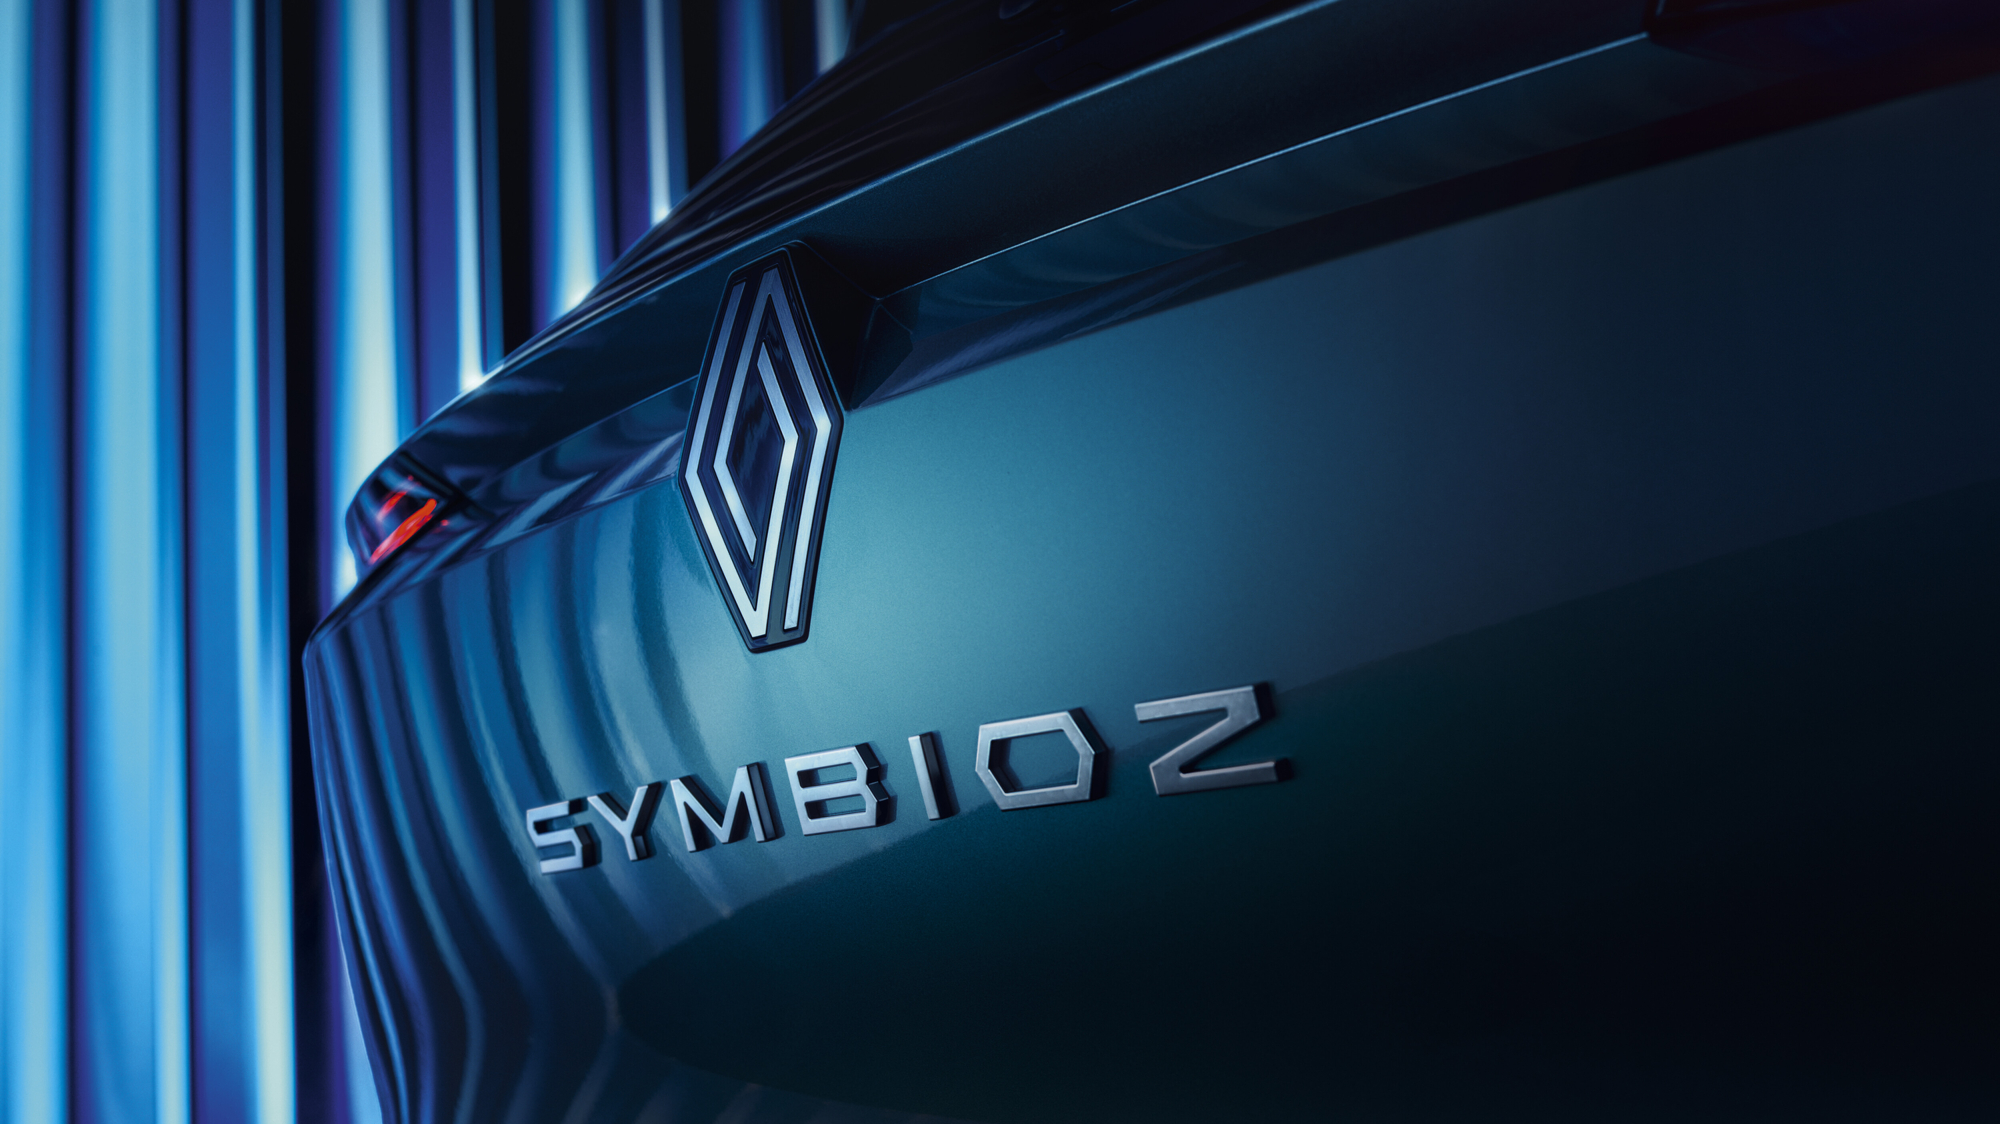 Renault Symbioz a compact family SUV continuing the C segment offensive